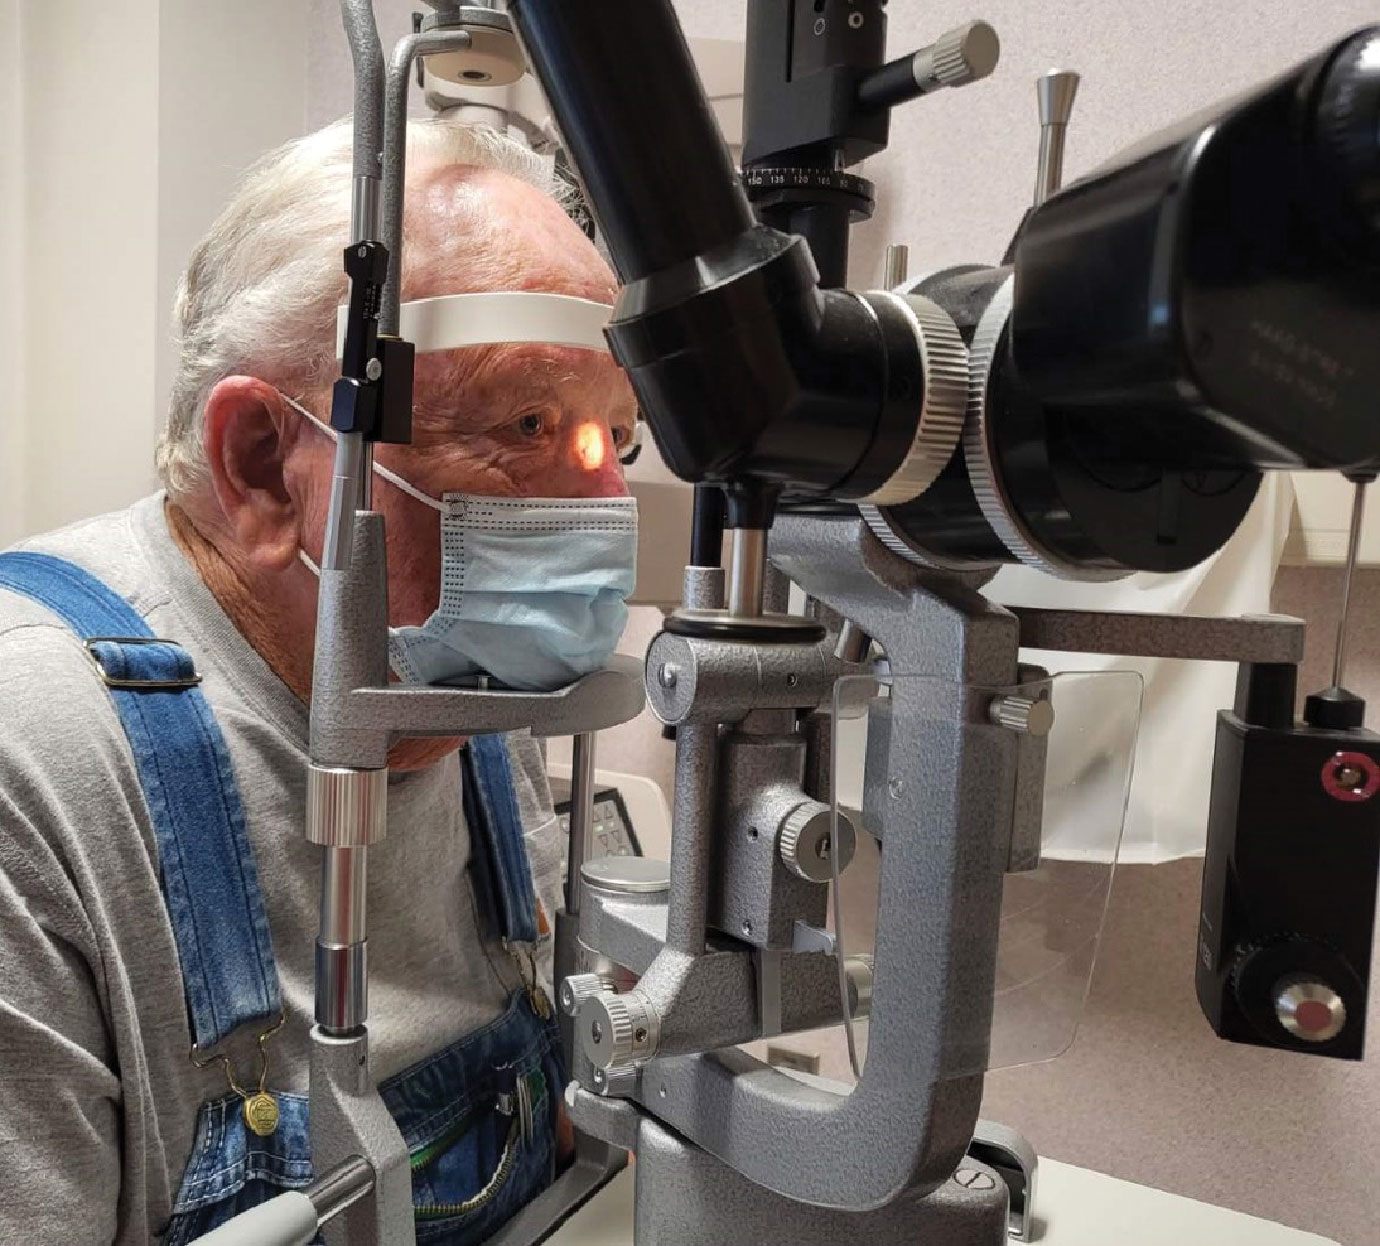 Fig. 3. Turning the ocular-light unit allows you to better visualize areas at the slit lamp that are otherwise hard to see if it is tangential to the area of interest. Here, we can more easily evaluate a nasal sidewall lesion.